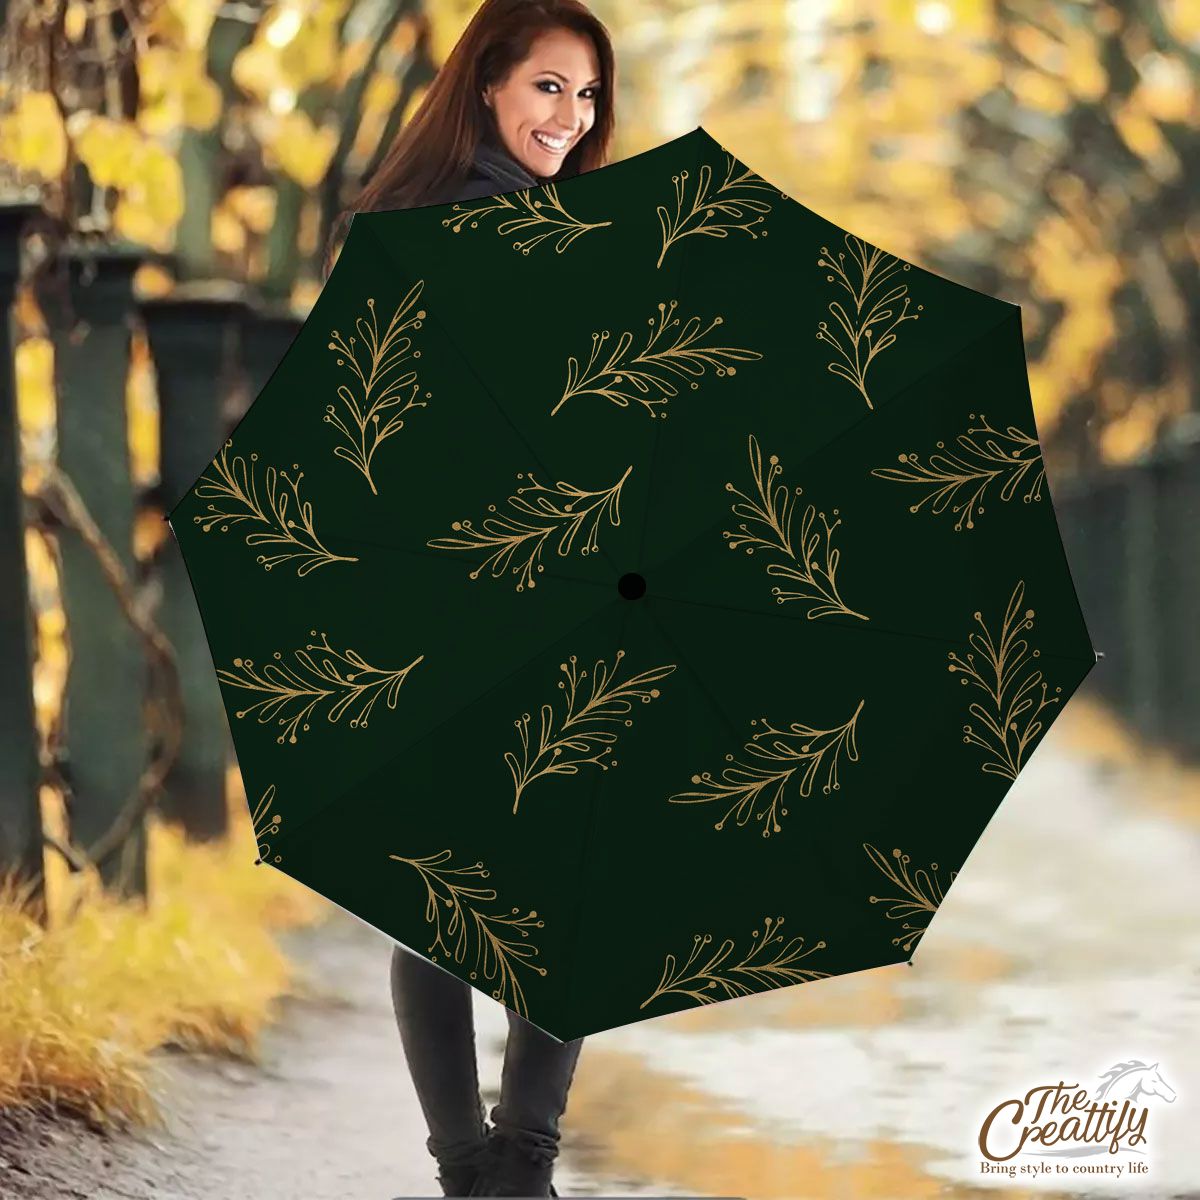 Gold And Green Christmas Tree Branch Umbrella